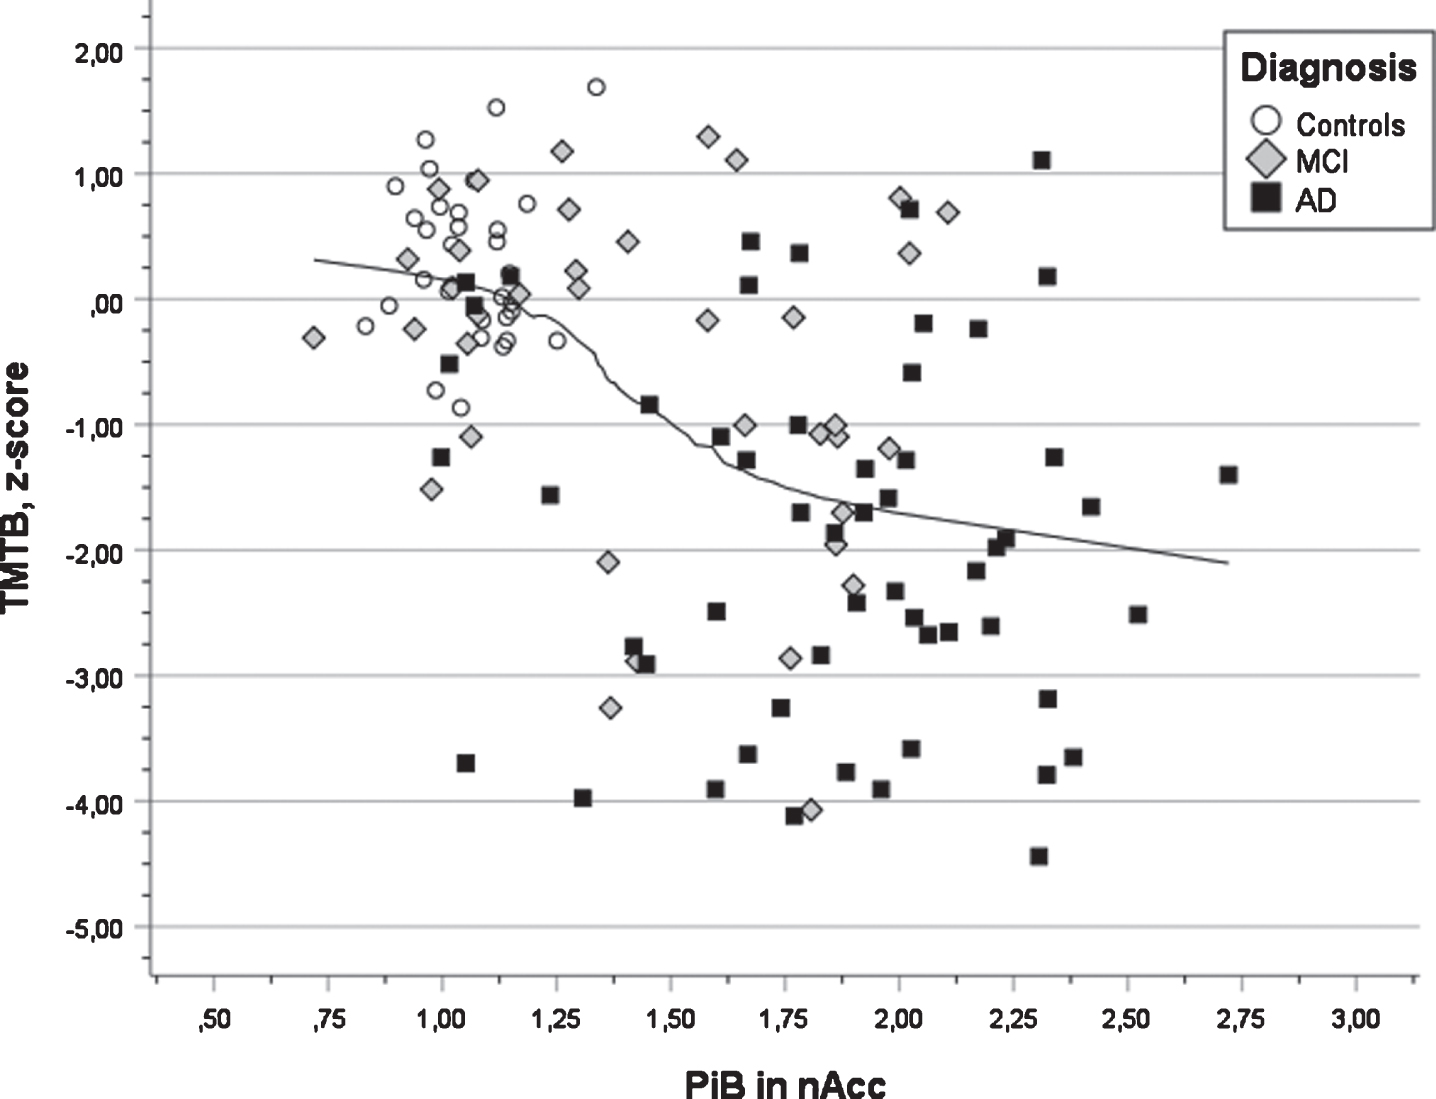 Scatter plot of test results in executive function (TMTB) versus PIB value in nucleus accumbens for three diagnostic groups (AD, MCI, and Controls) also showing the regression line using local weighted regression.